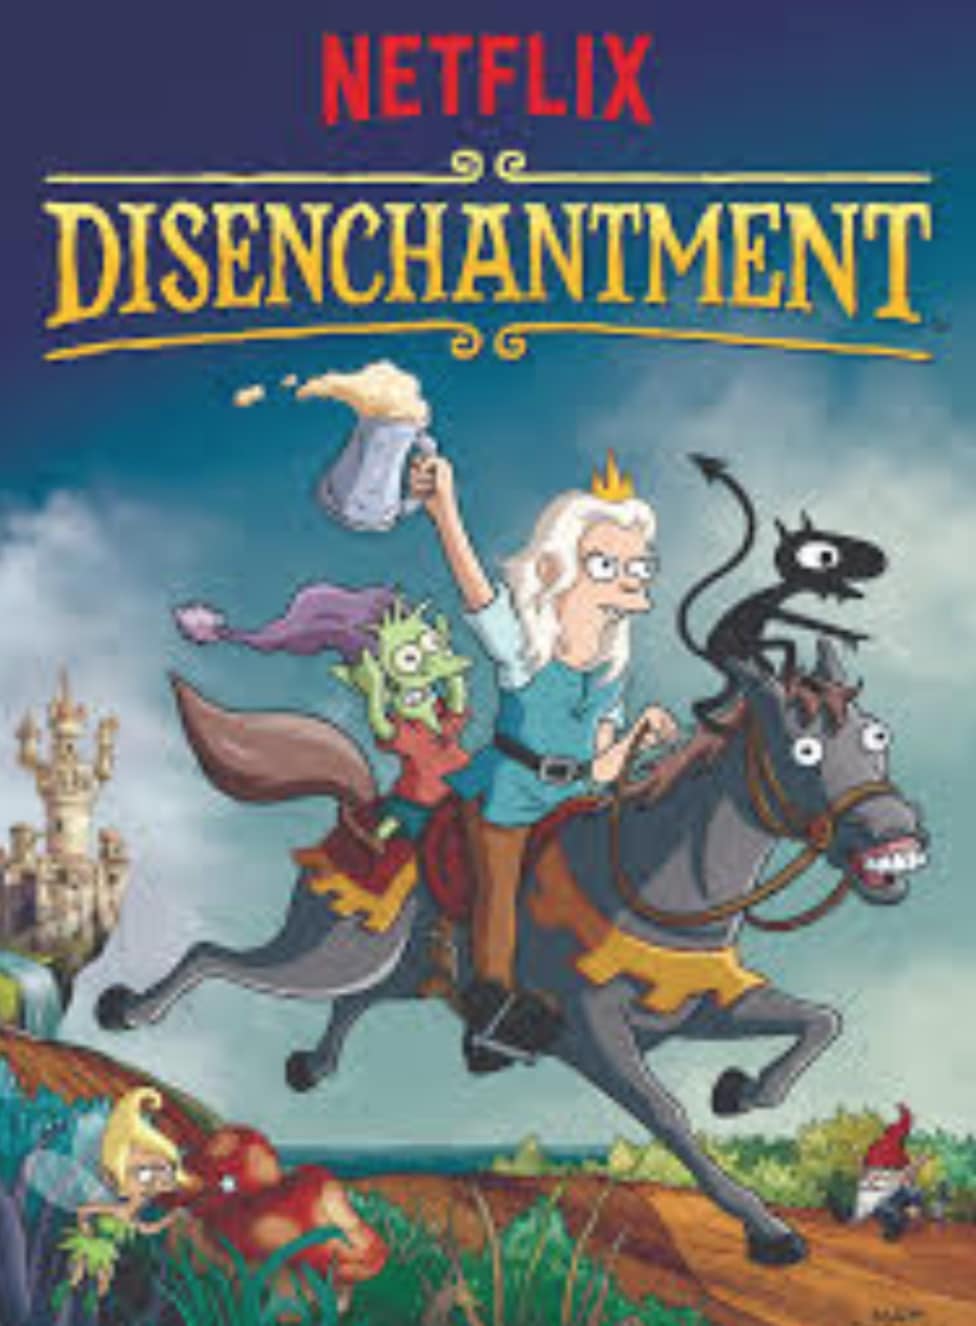 Disenchantment Poster Wallpapers